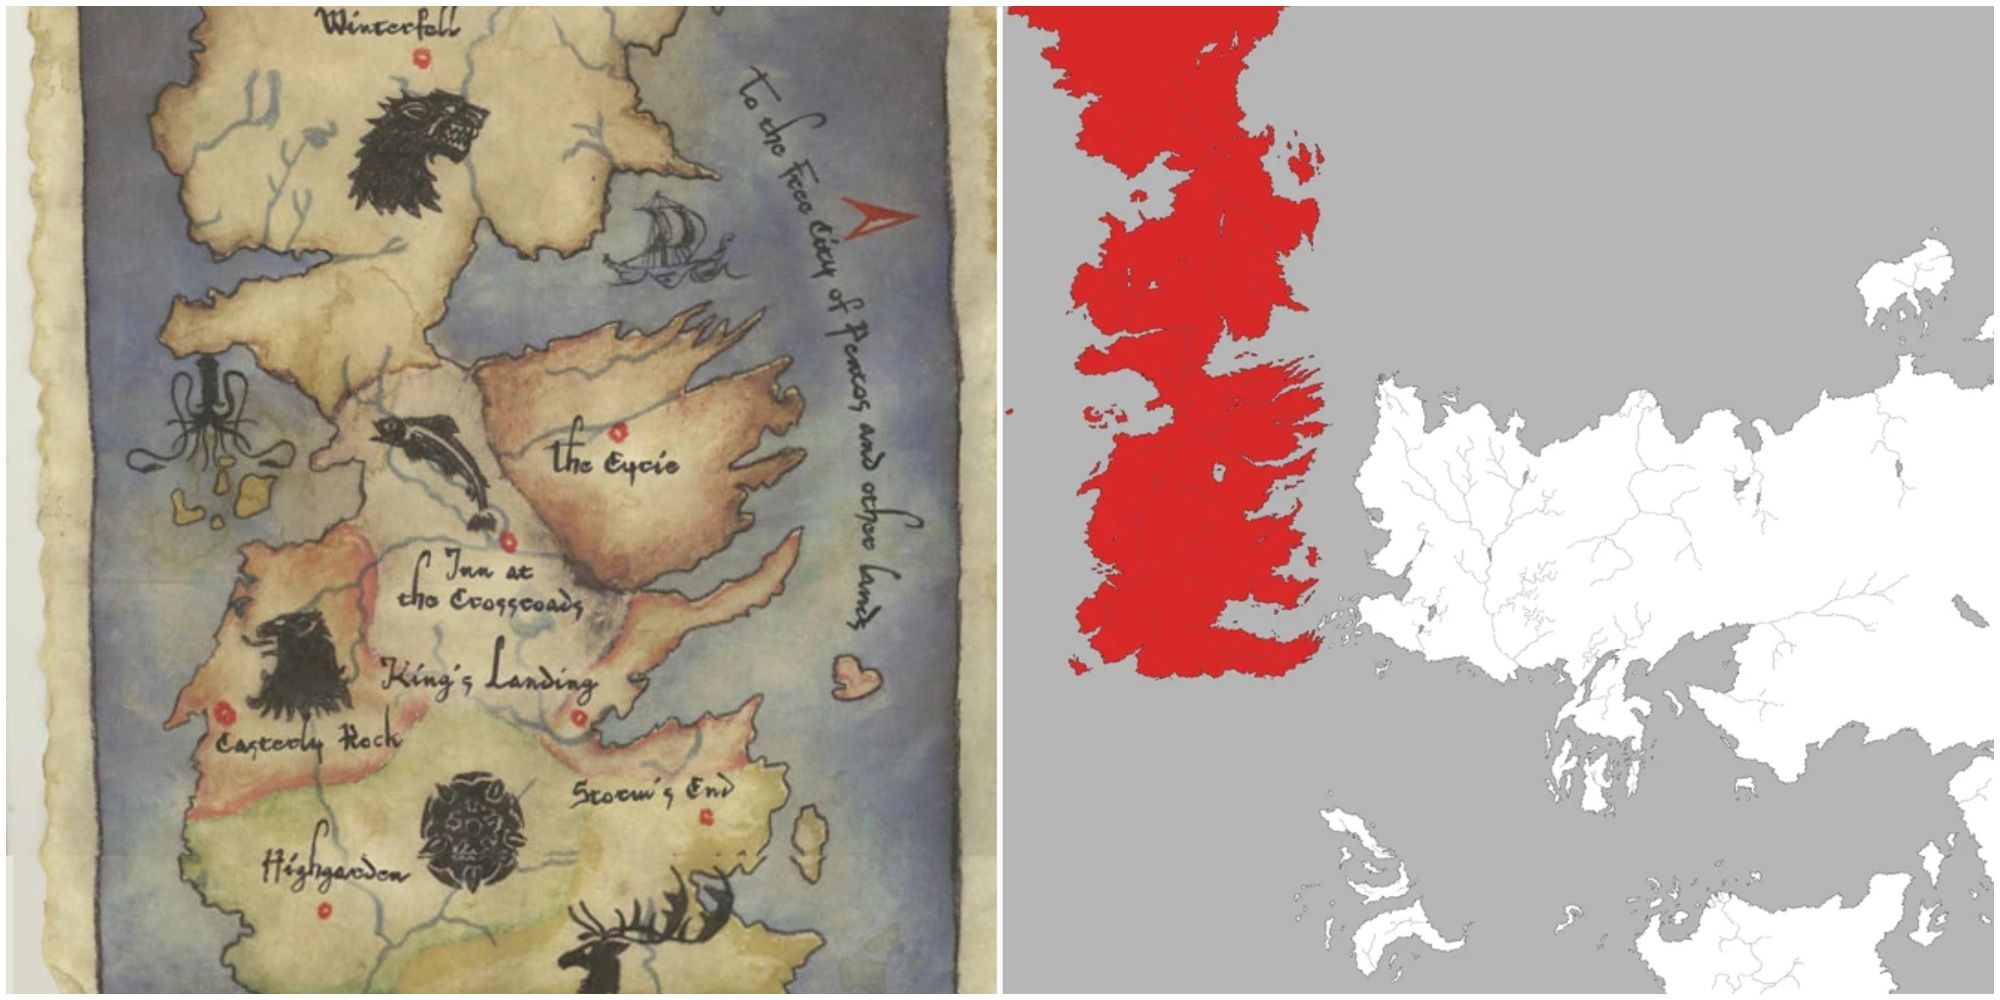 Game Of Thrones The Continent Of Westeros Explained